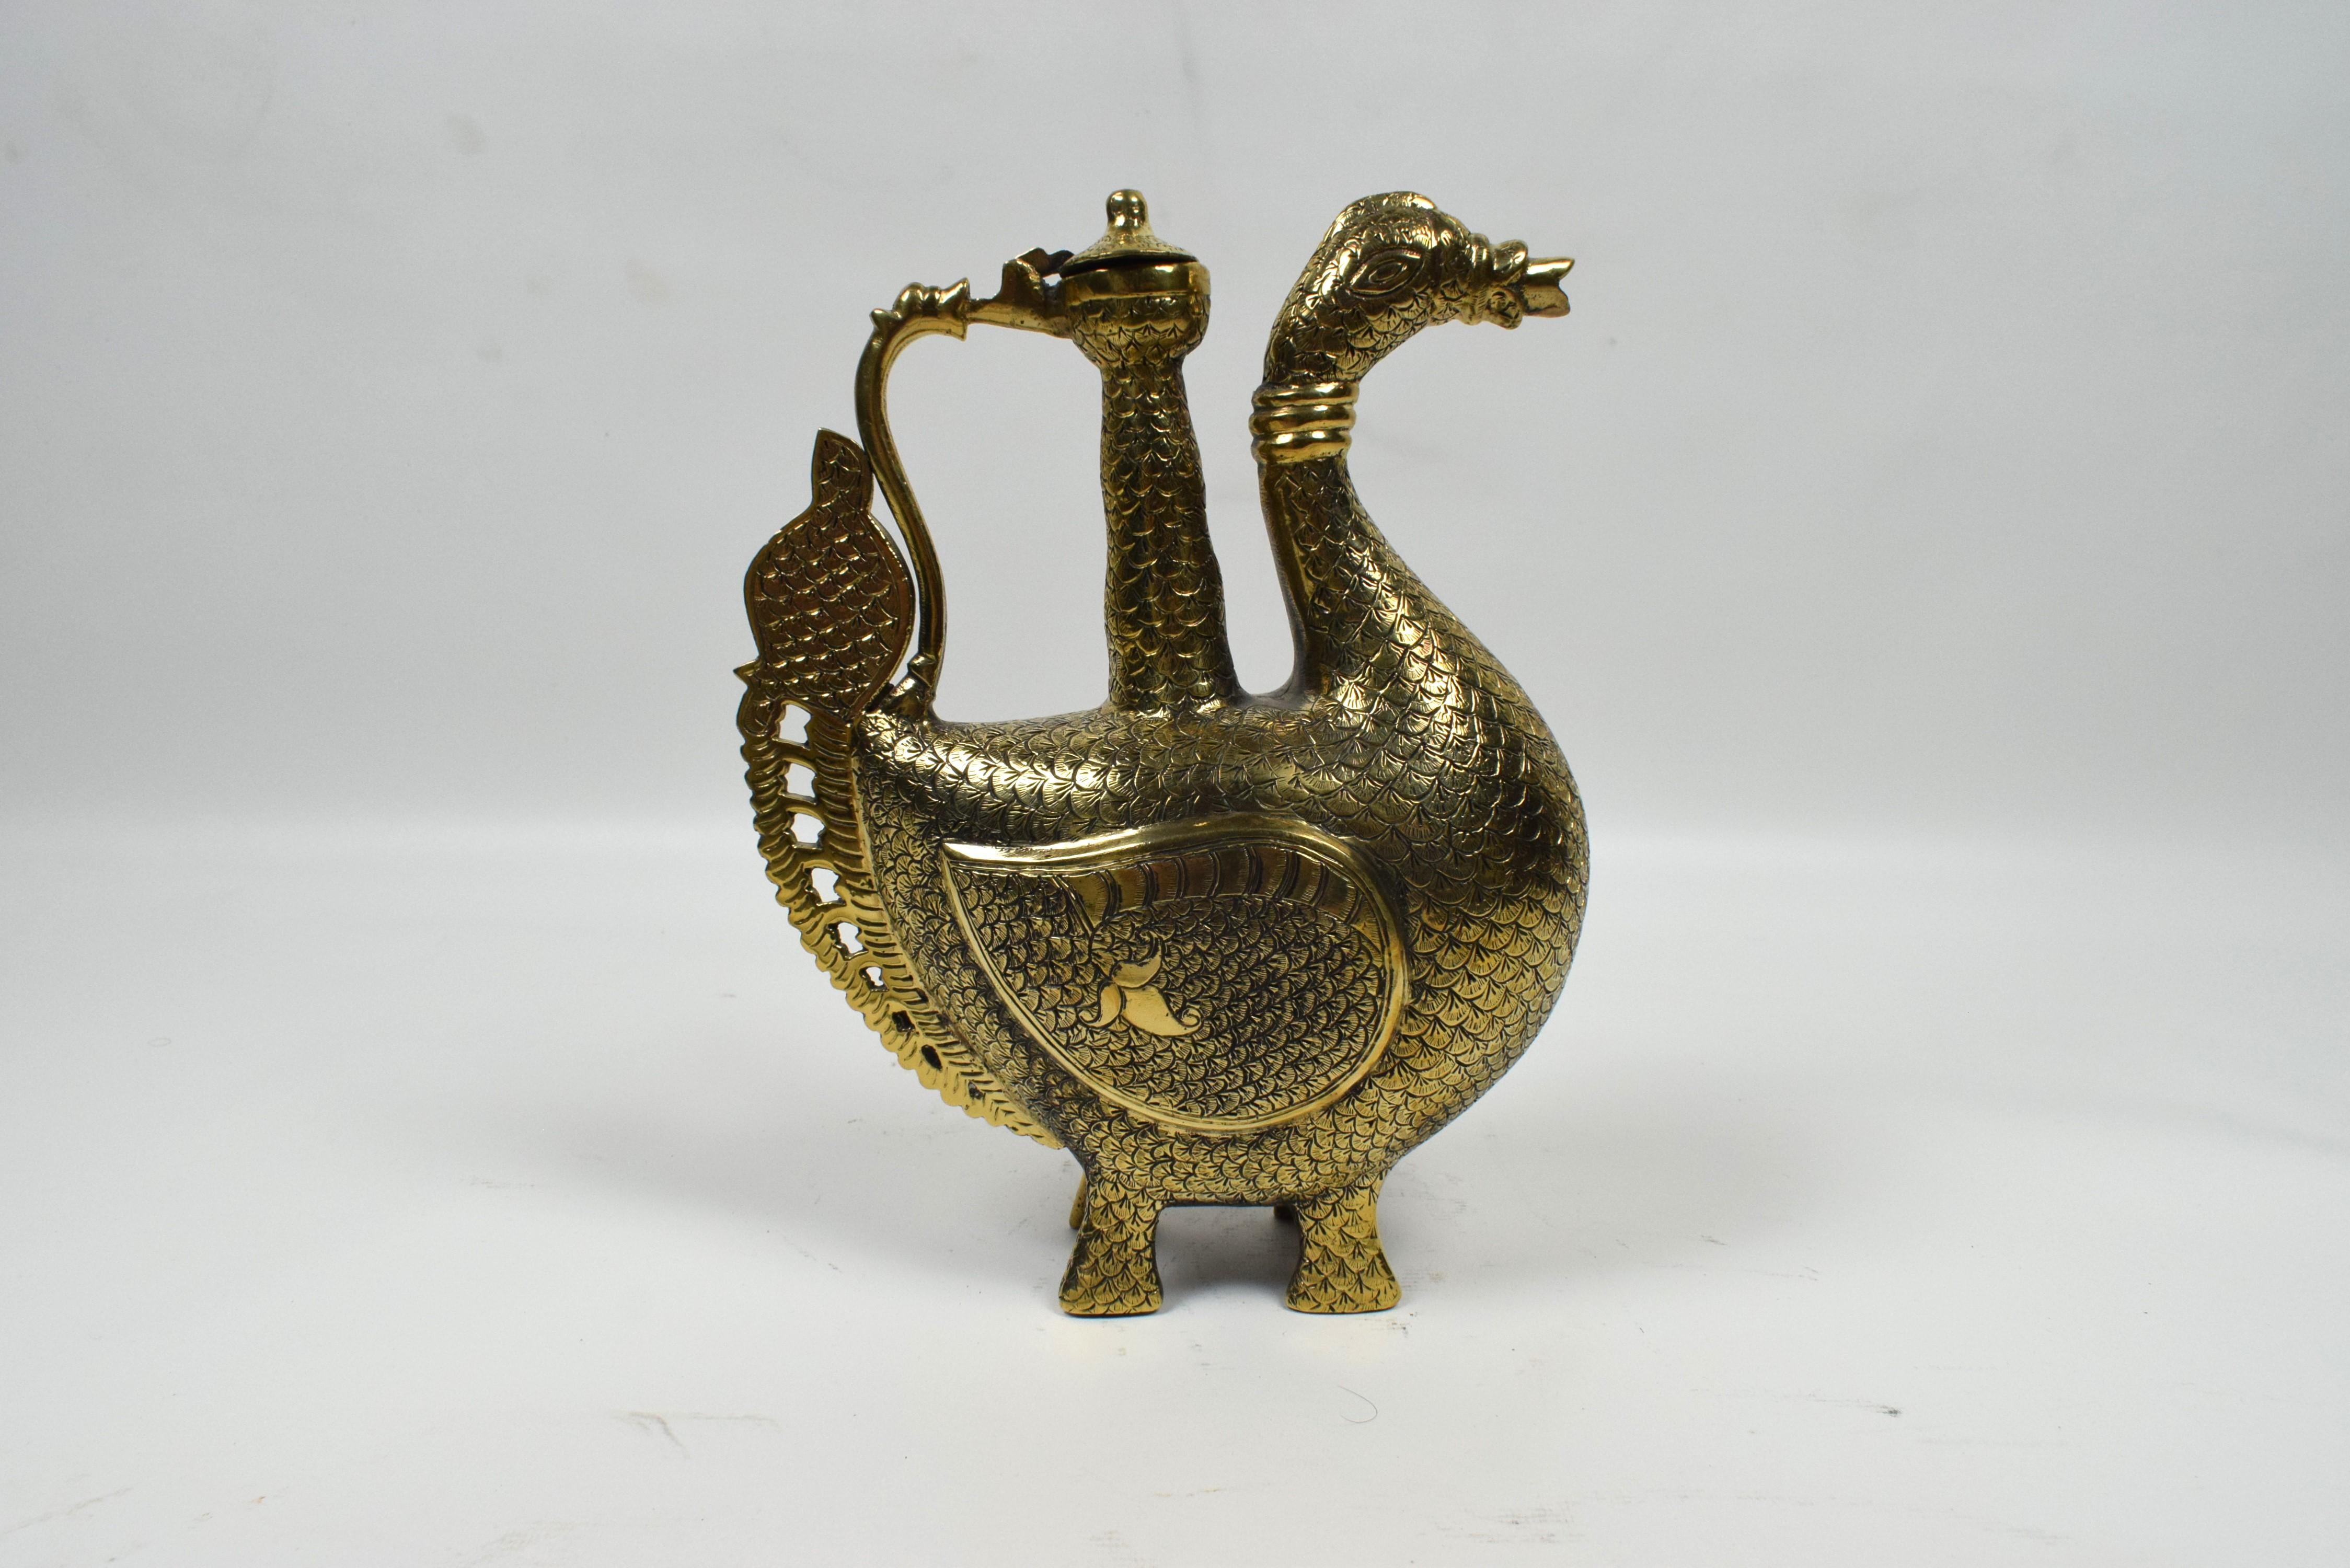 The ewer, a ceremonial pitcher, is shaped in the form of a majestic peacock, a significant motif in Mughal art symbolizing beauty, grace, and regality. The body of the ewer is crafted from high-quality brass, a metal often favored by Mughal artisans